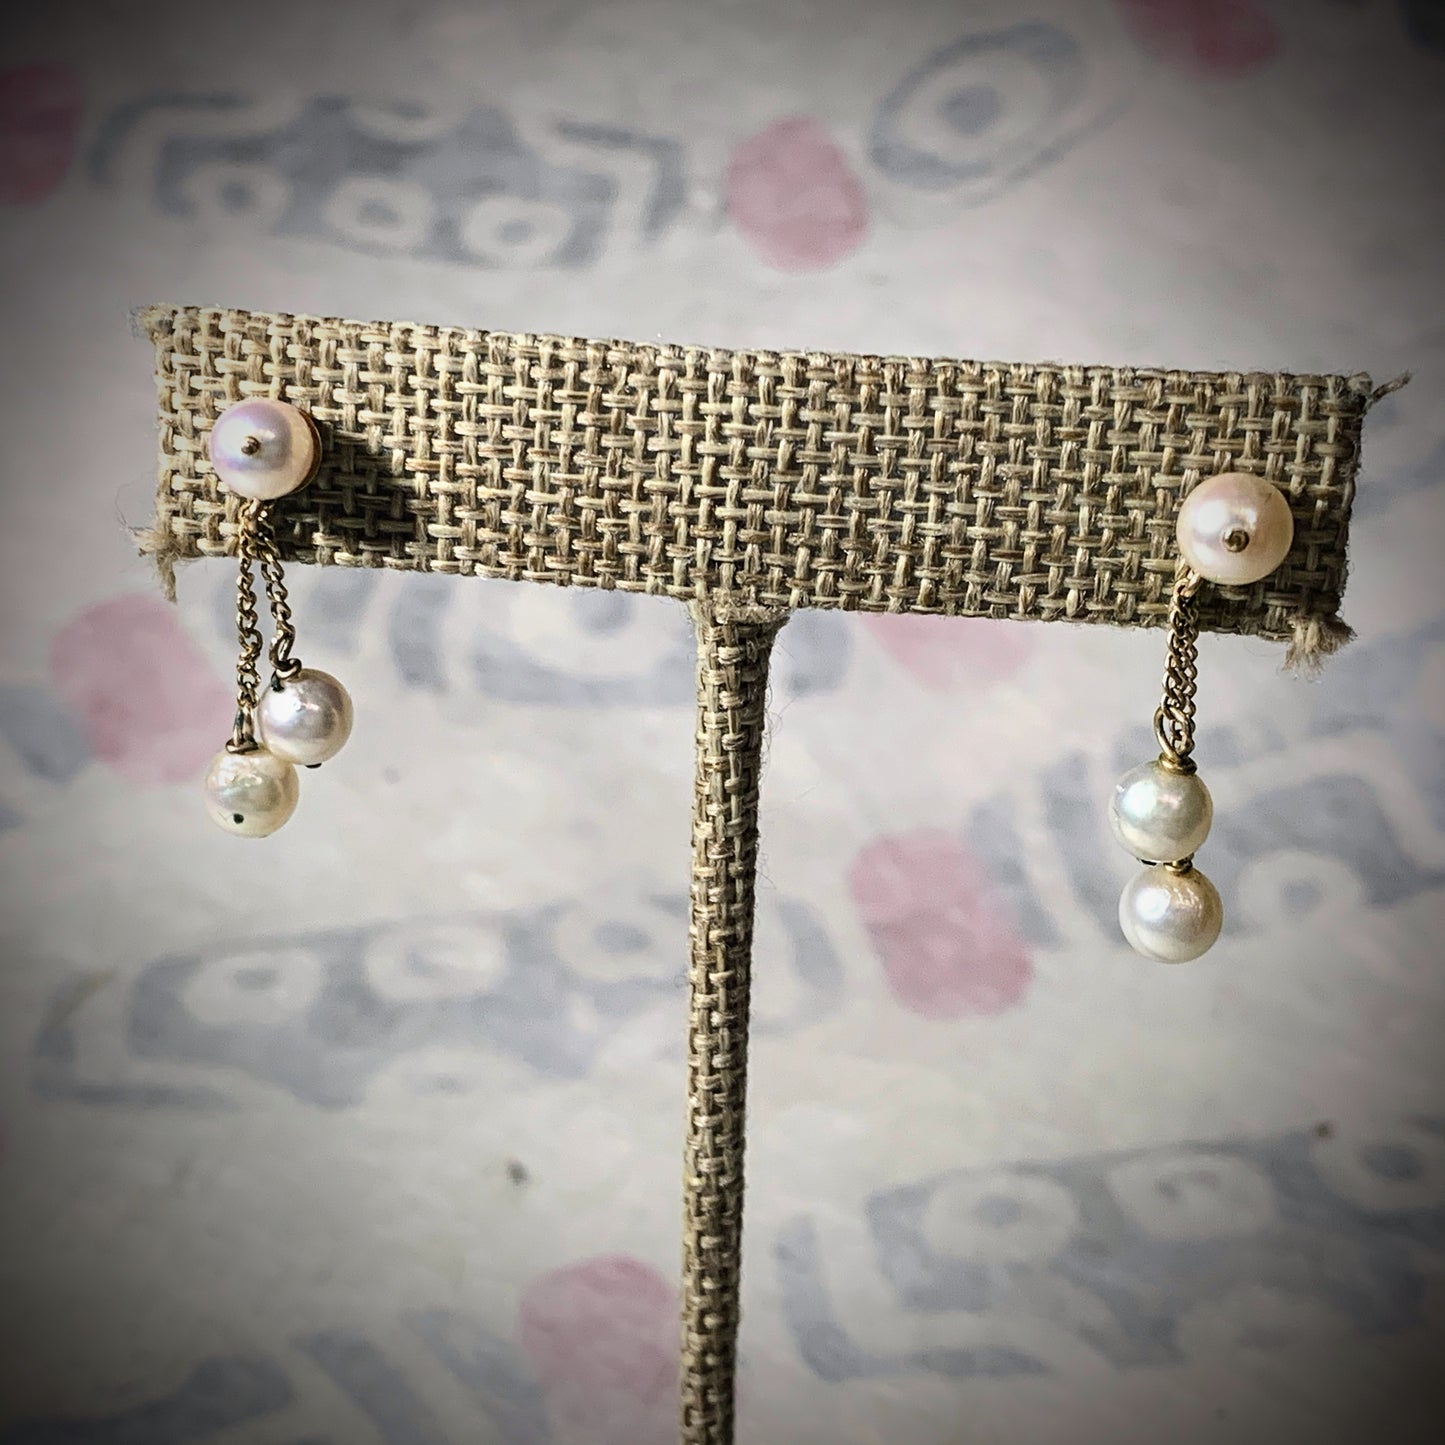 A pair of pearl and gold earrings